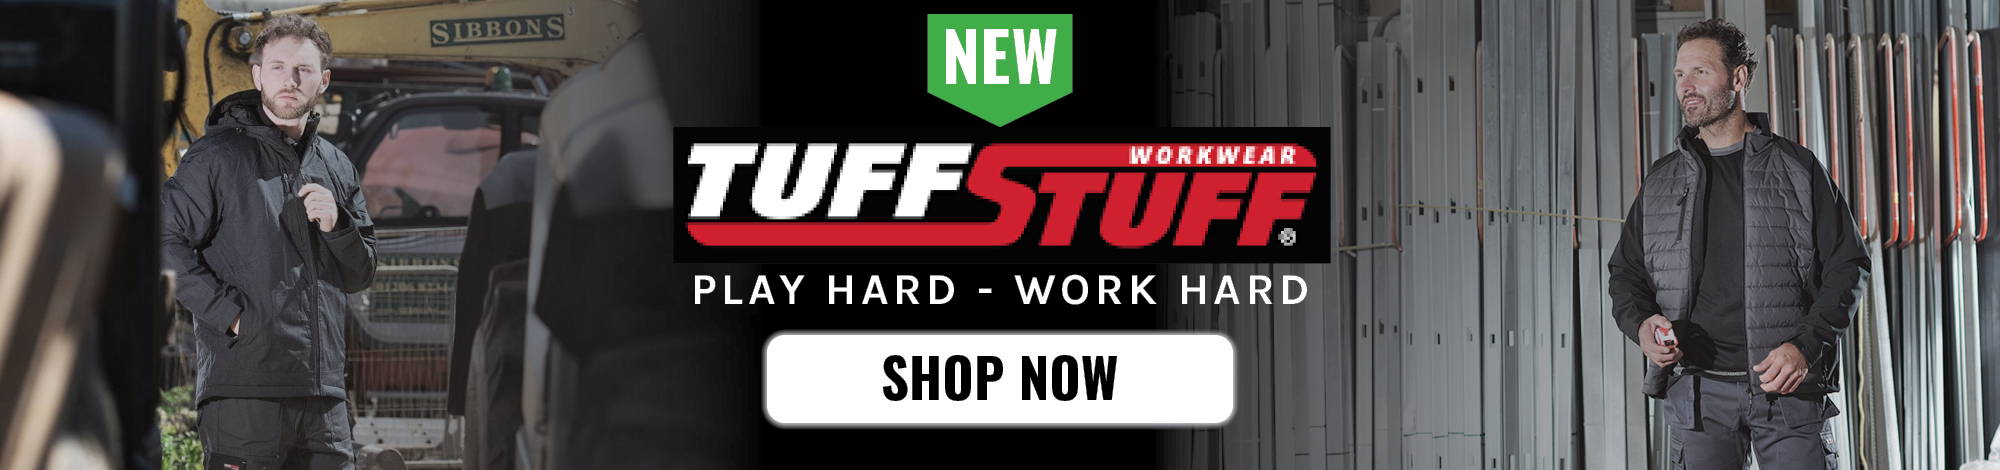 banner depicting tuff stuff workwear, tagline is play hard, work hard with a shop now button